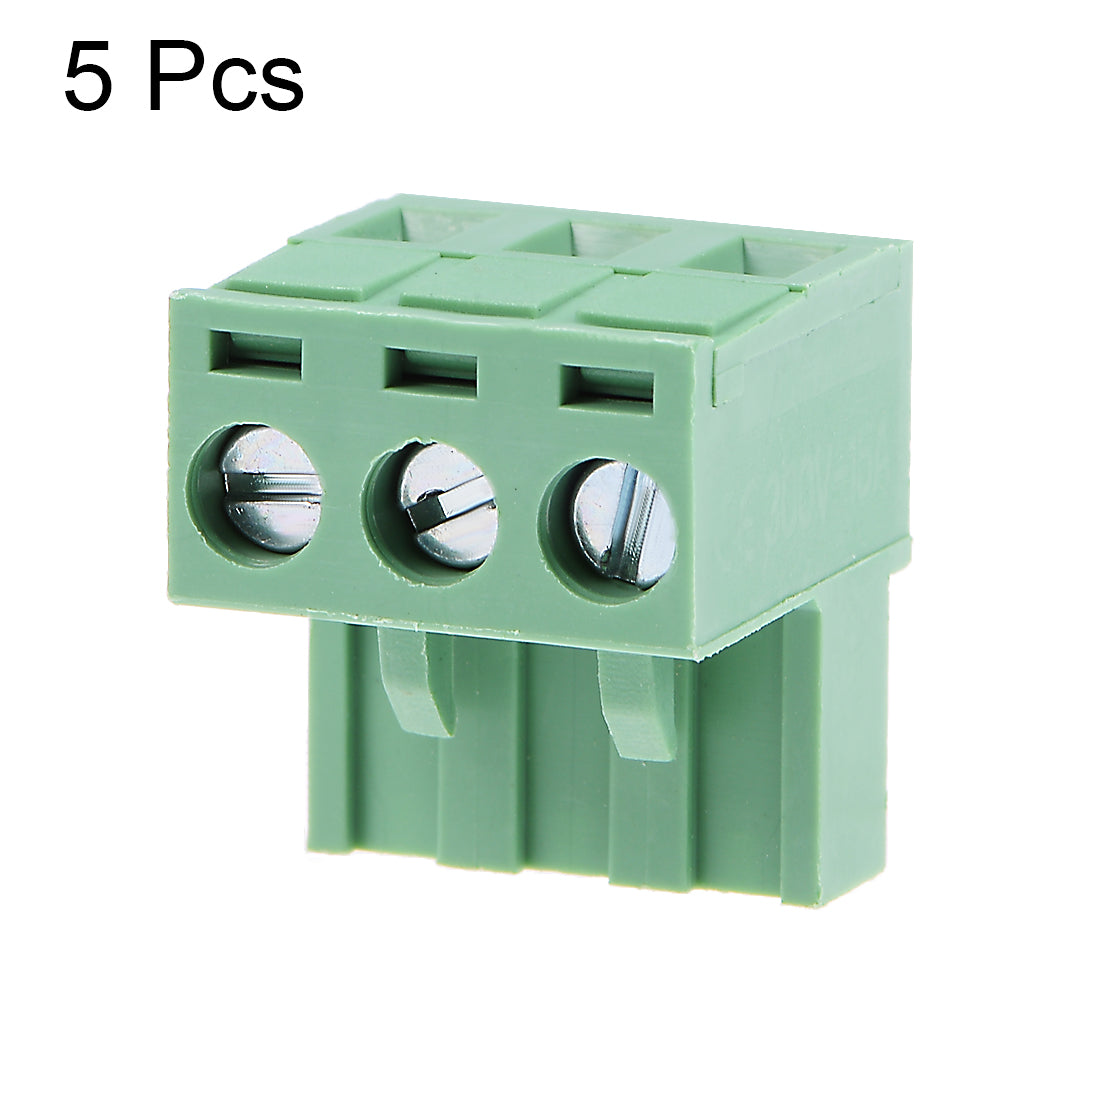 uxcell Uxcell 5Pcs AC300V 15A 5.08mm Pitch 3P Needle Seat Insert-In PCB Terminal Block green